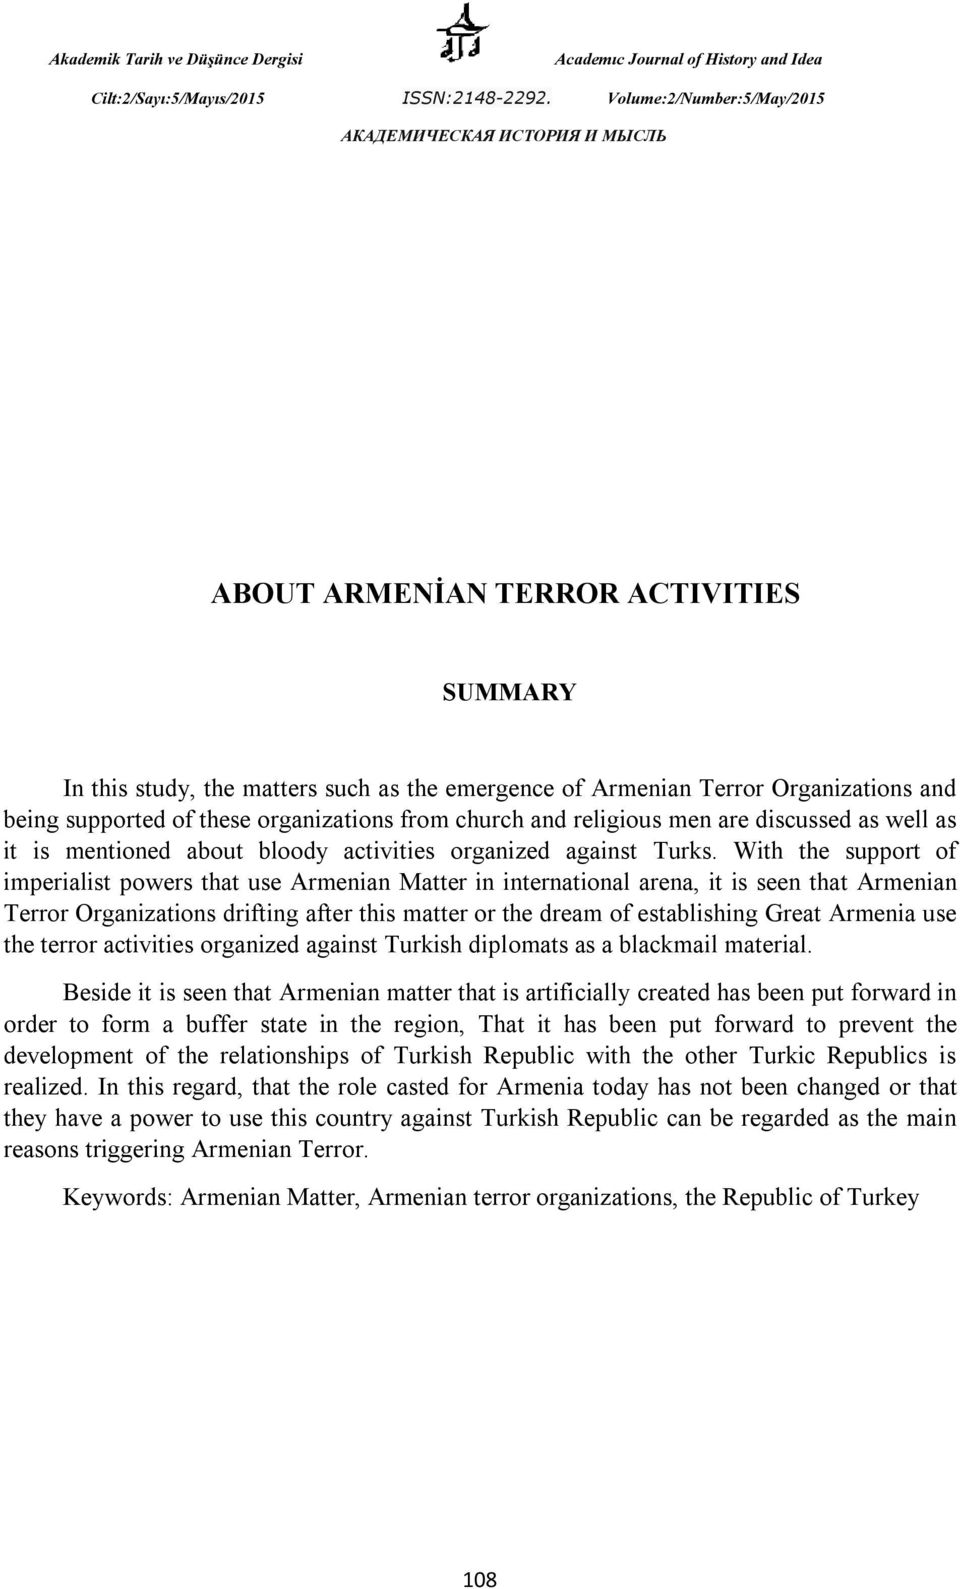 With the support of imperialist powers that use Armenian Matter in international arena, it is seen that Armenian Terror Organizations drifting after this matter or the dream of establishing Great